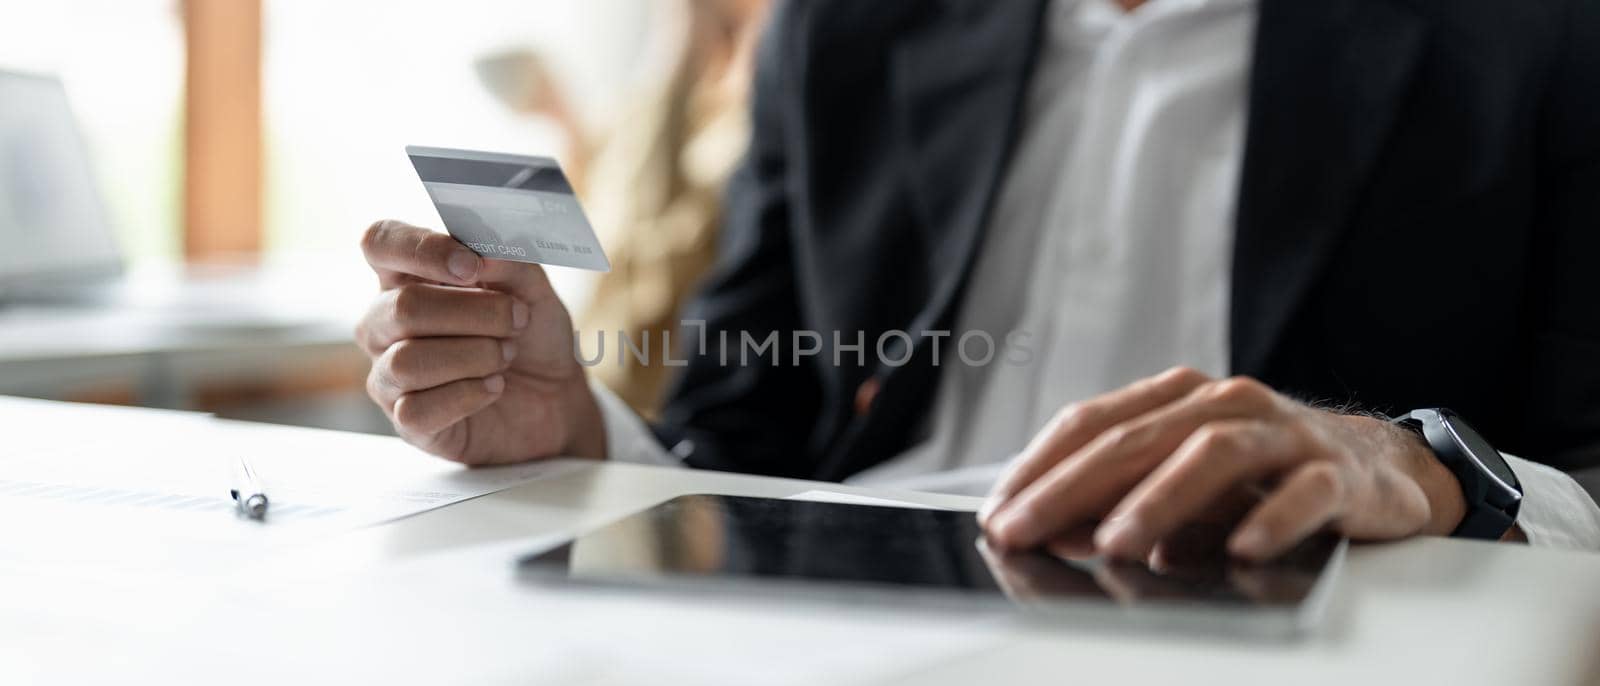 Man hands holding credit card and using laptop. Online shopping by nateemee